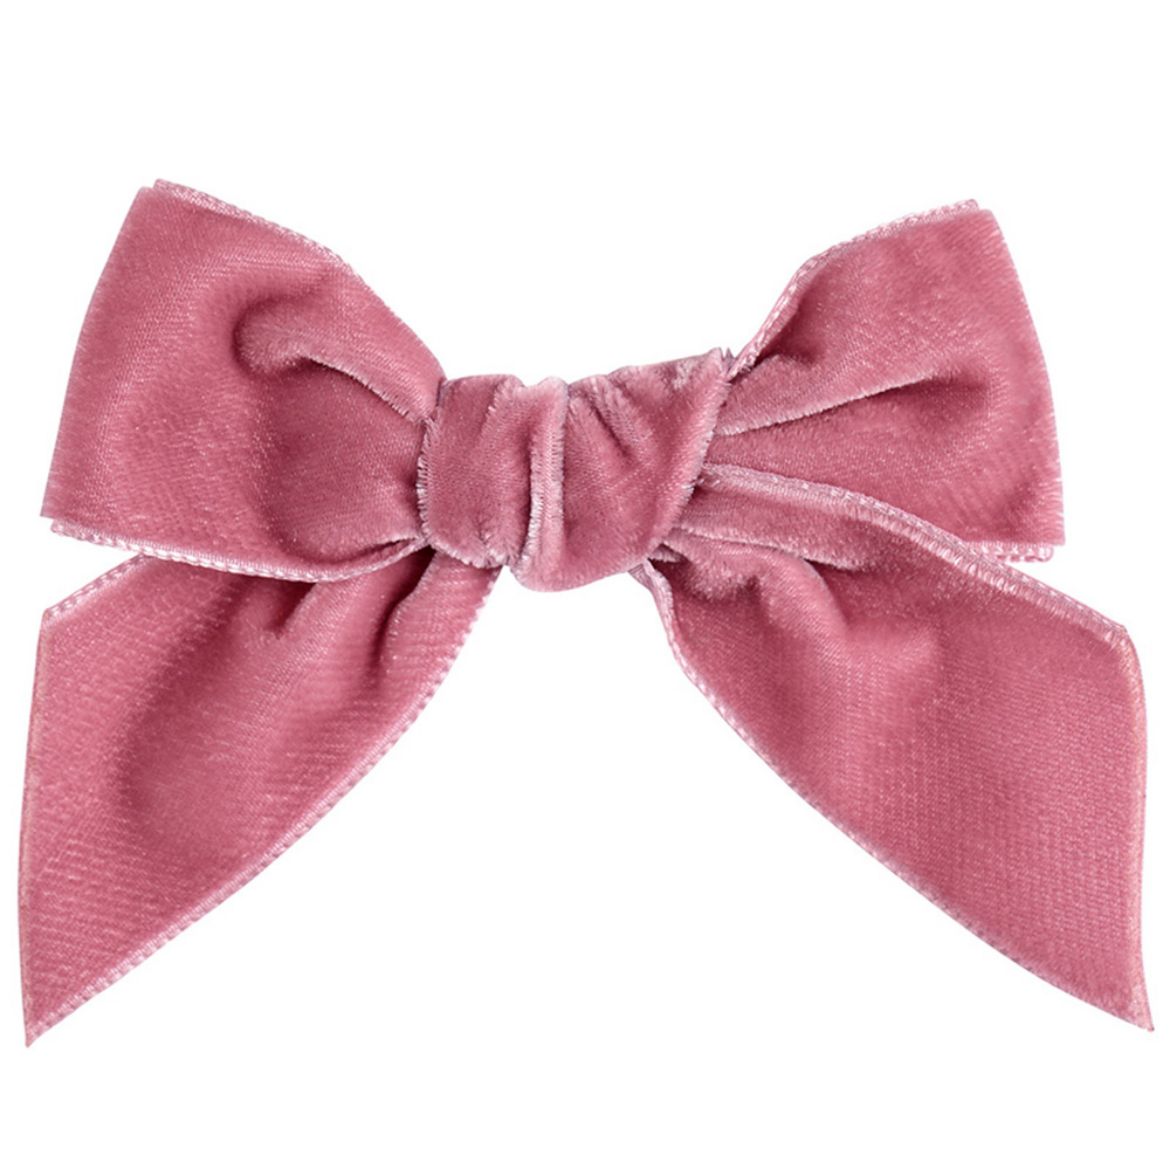 Picture of Condor Velvet Bow - Pale Pink